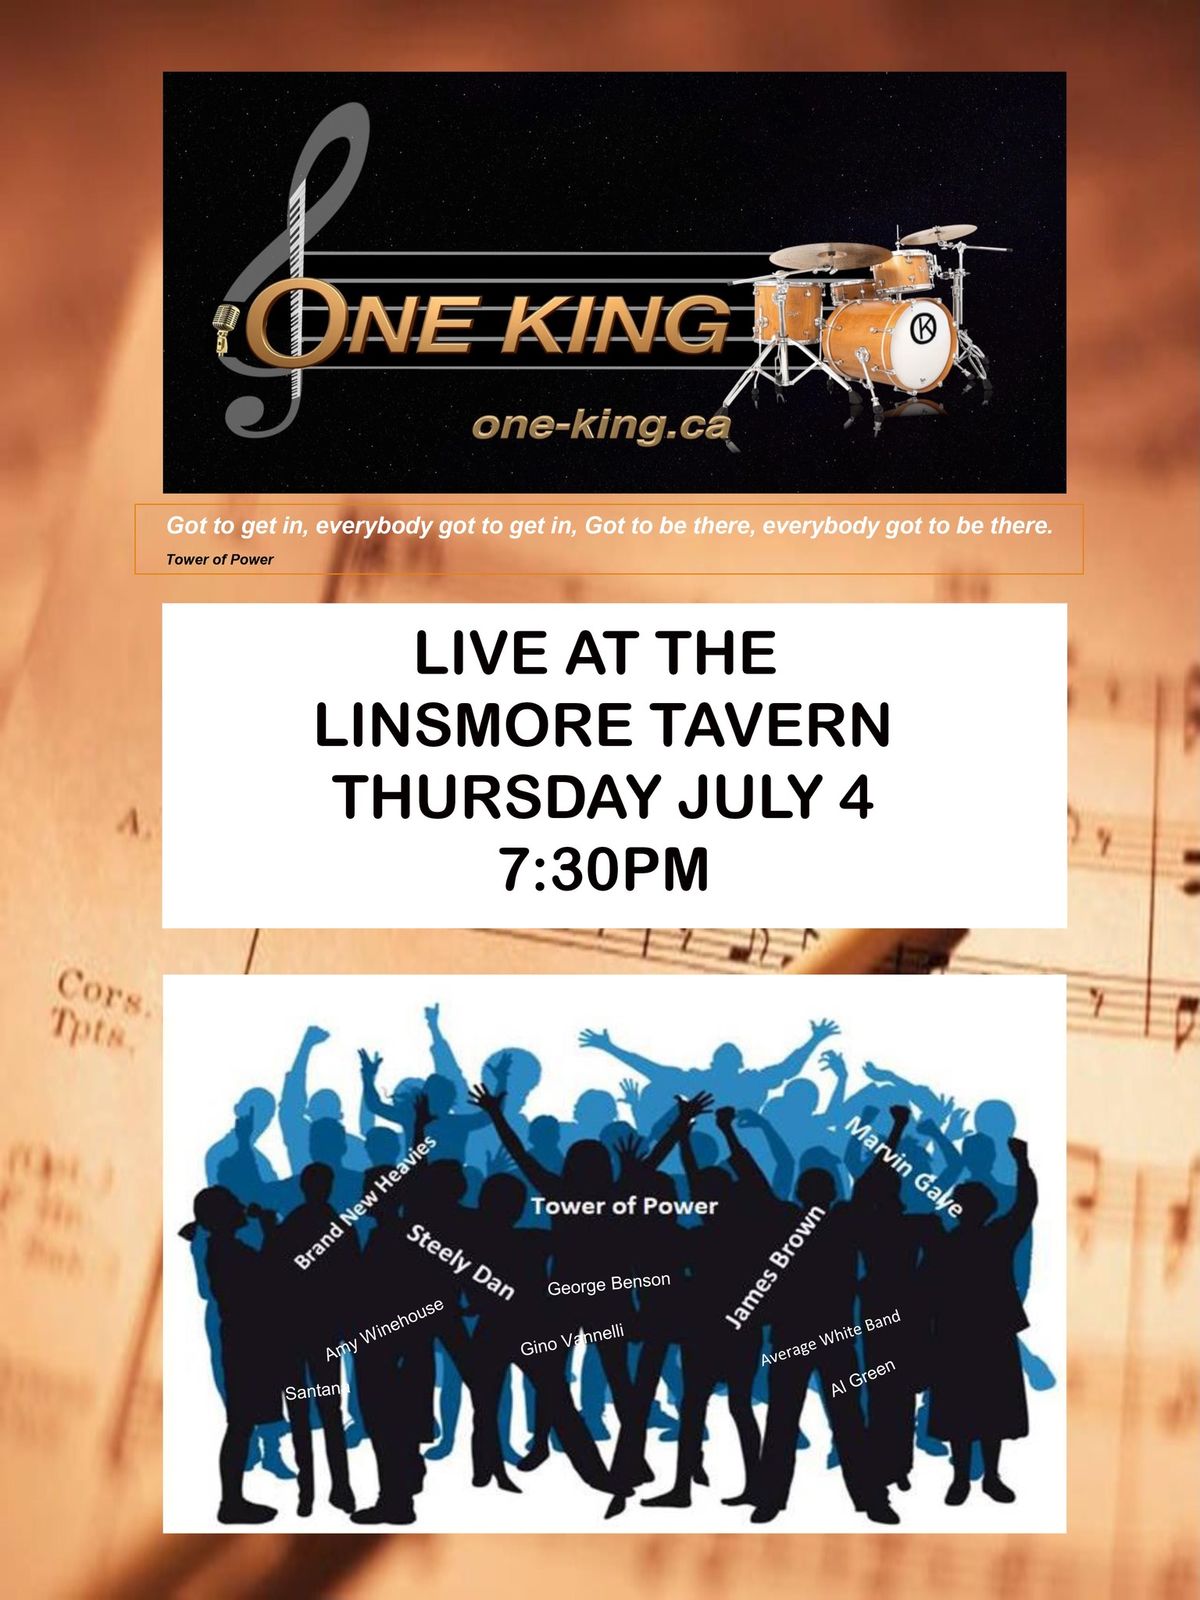 One King bringing some R&B, Soul and a whole lot of Motown to the Linsmore Tavern!